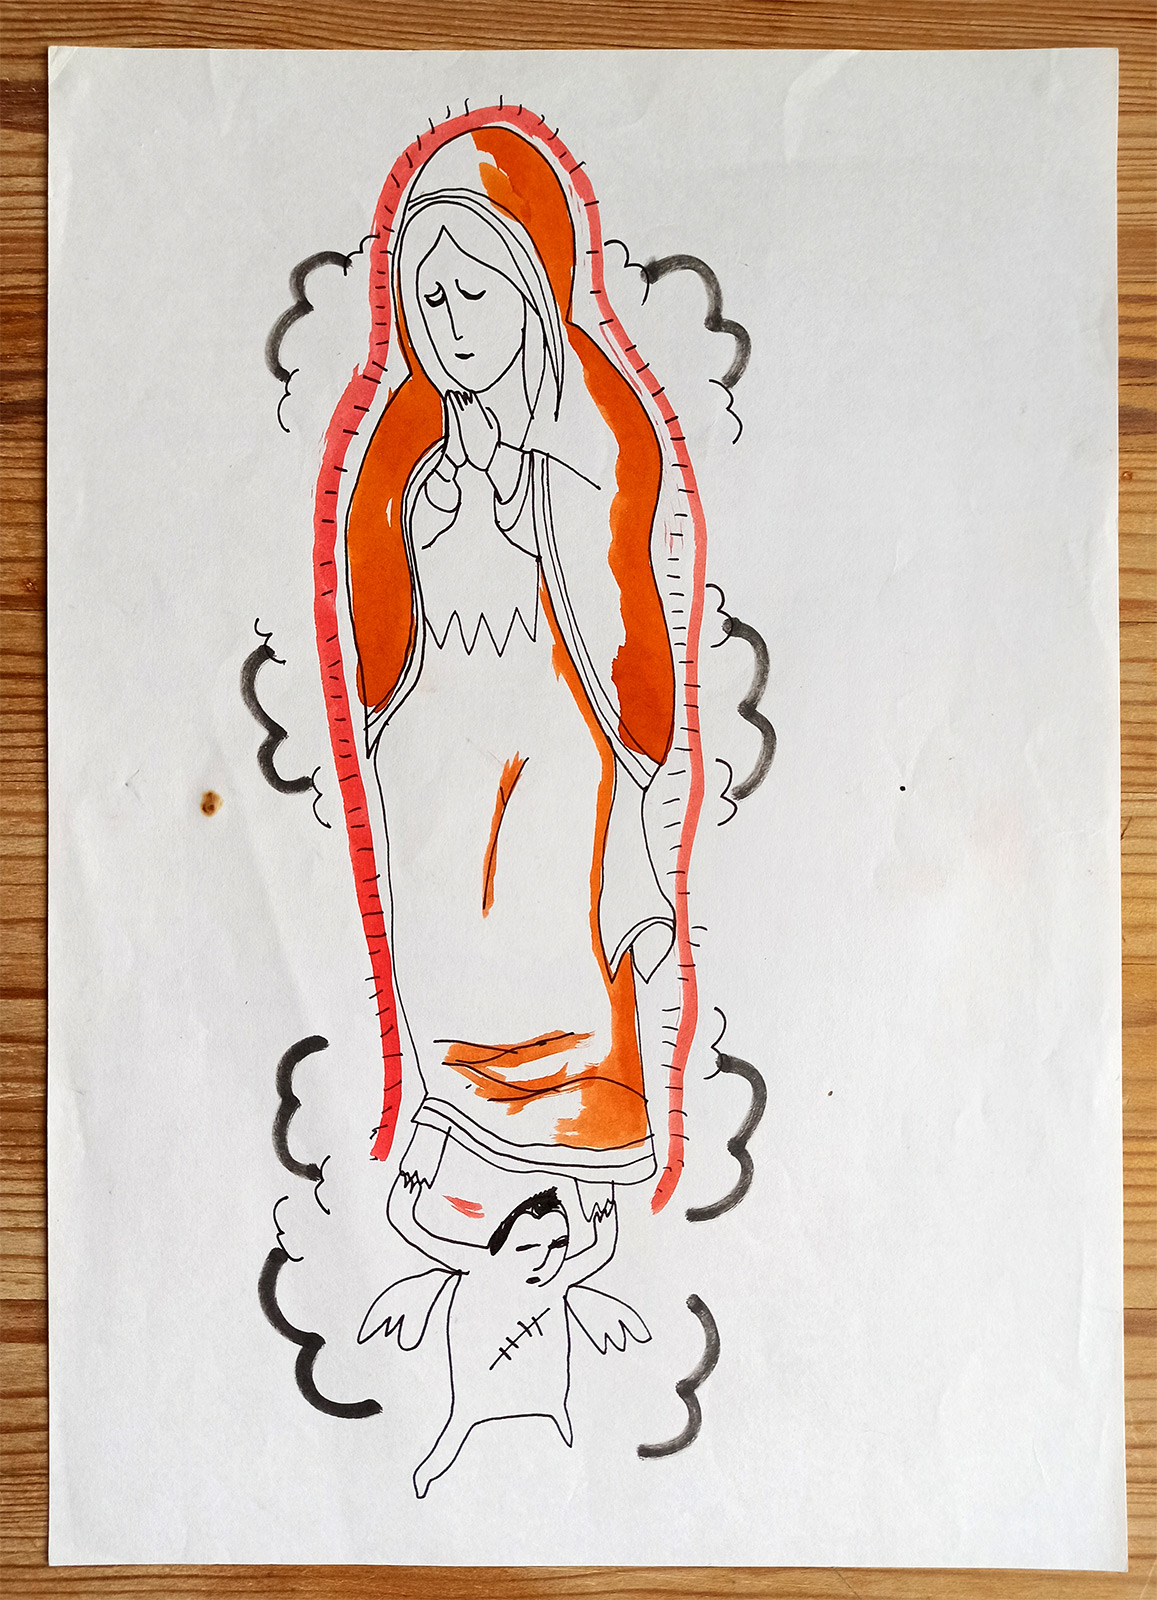 drawings, aesthetic, figurative, graphical, people, religion, orange, paper, marker, contemporary-art, female, modern, modern-art, women, Buy original high quality art. Paintings, drawings, limited edition prints & posters by talented artists.